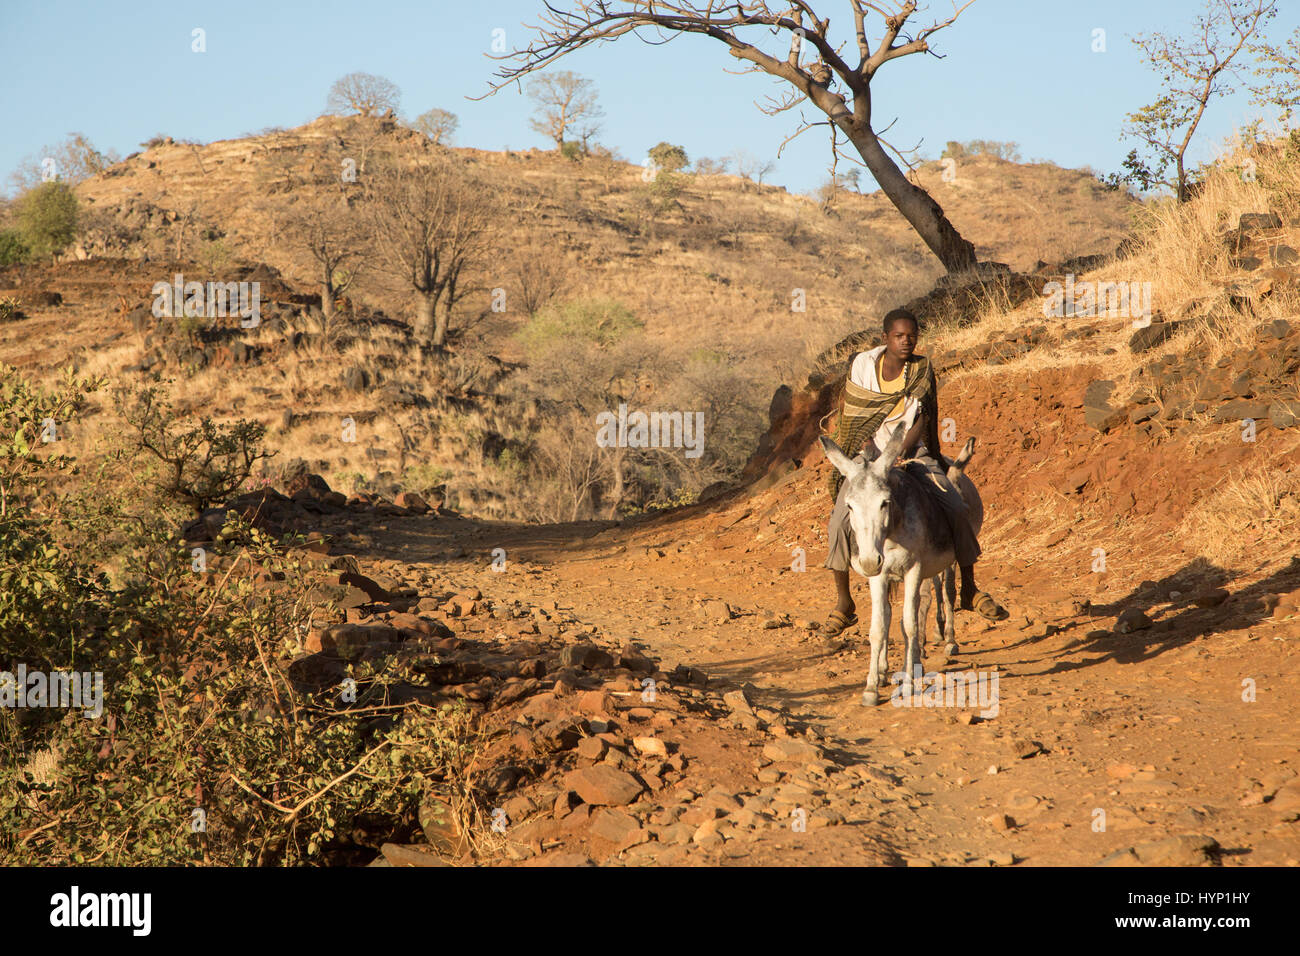 Kauda, Sudan. 12th Feb, 2017. dpatop - A boy rides a donkey near Kauda, Sudan, 12 February 2017. The Nuba mountains are controlled by the national liberation army Sudan People's Liberation Army-North (SPLA-N) and its political arm, the Sudan People's Liberation Movement-North (SPLM-N). Photo: Laura Wagenknecht/dpa/Alamy Live News Stock Photo